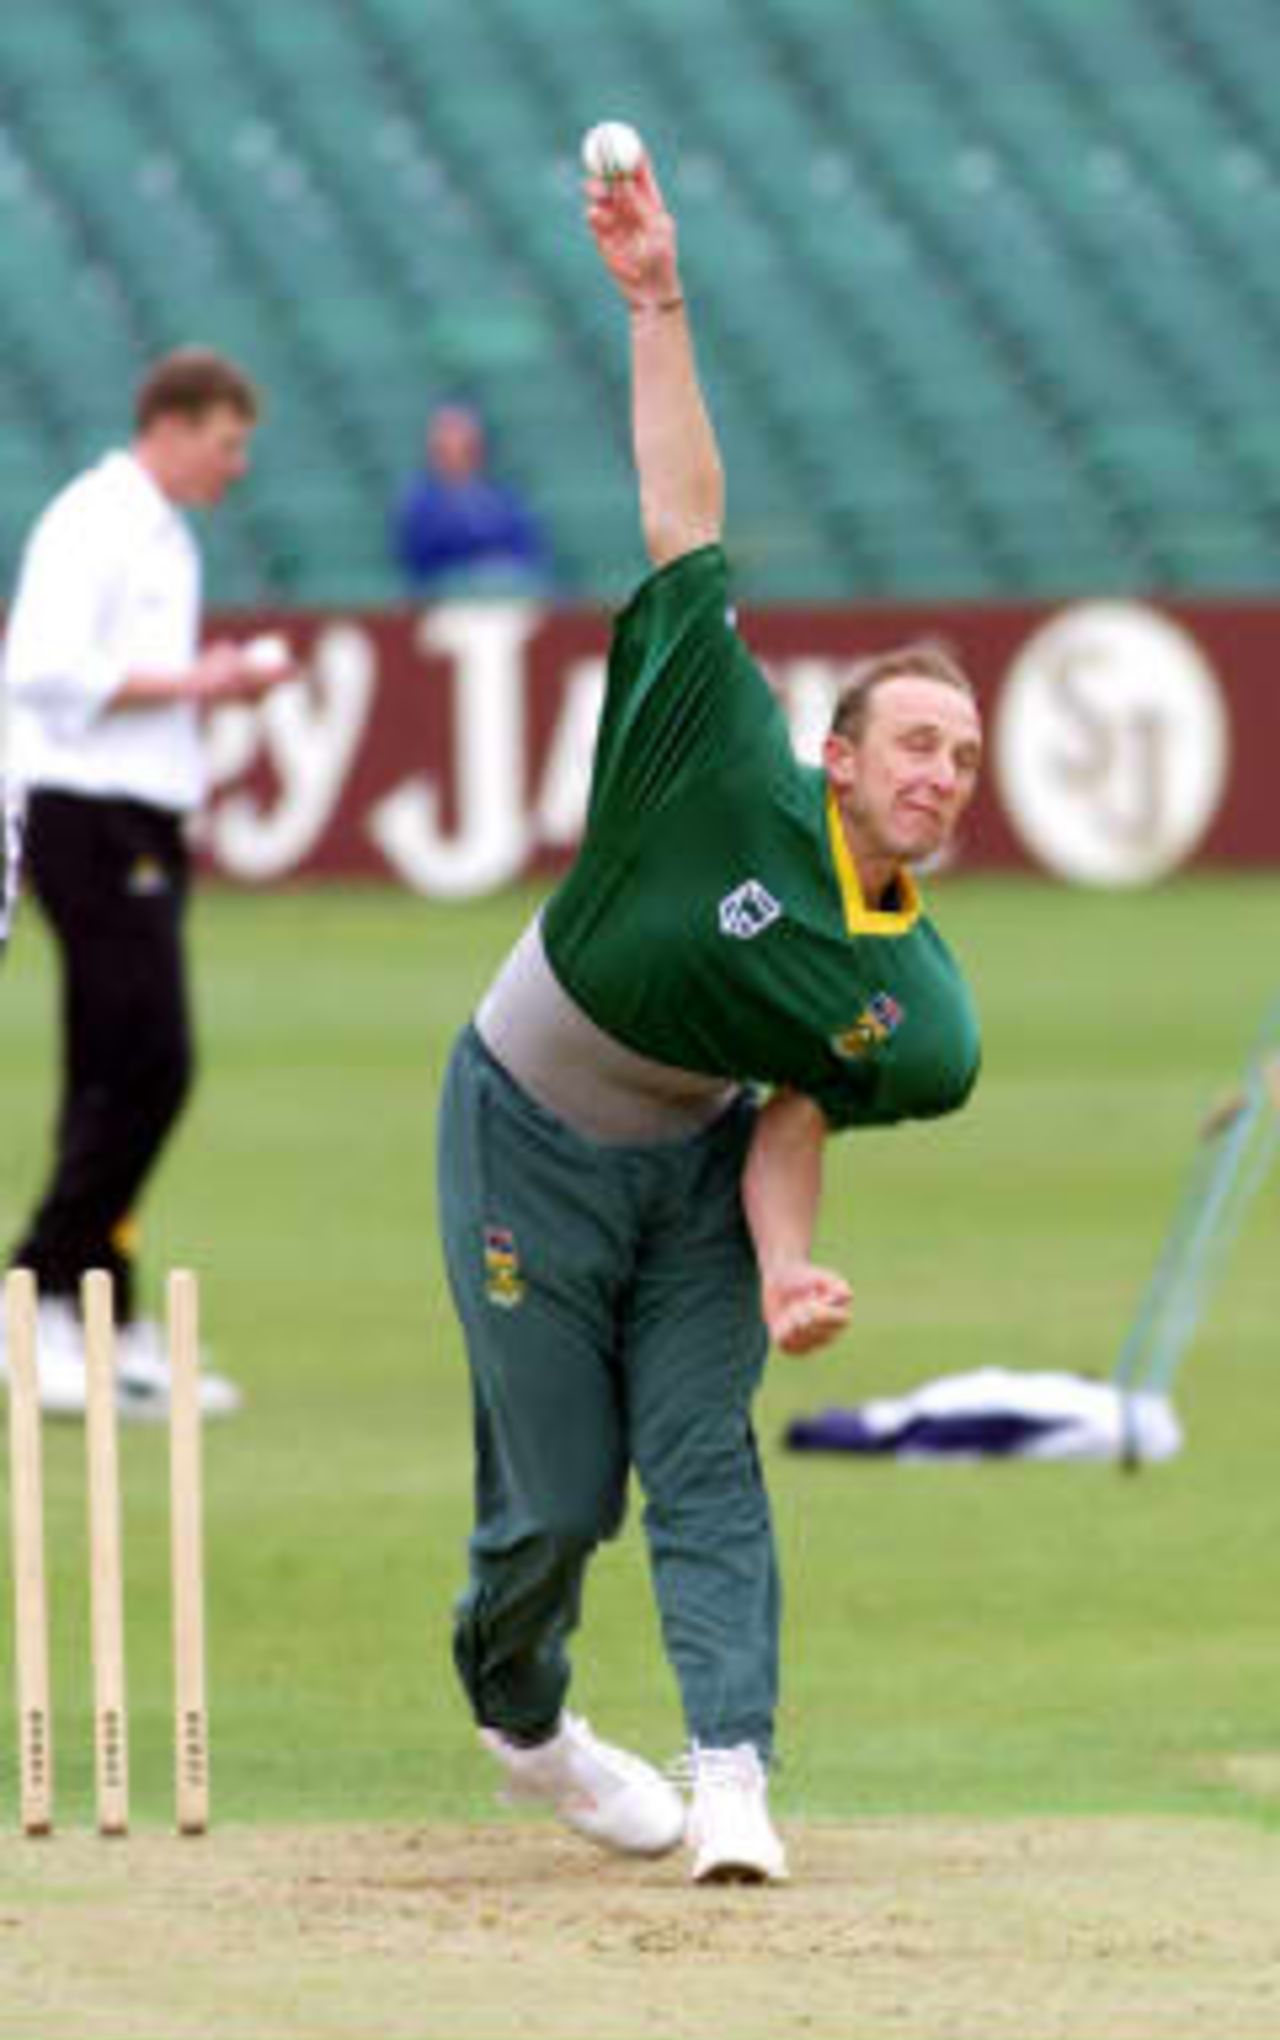 Allan Donald in action 06 May 1999 during training at Hove in preparation for the start of the World Cup on 14 May